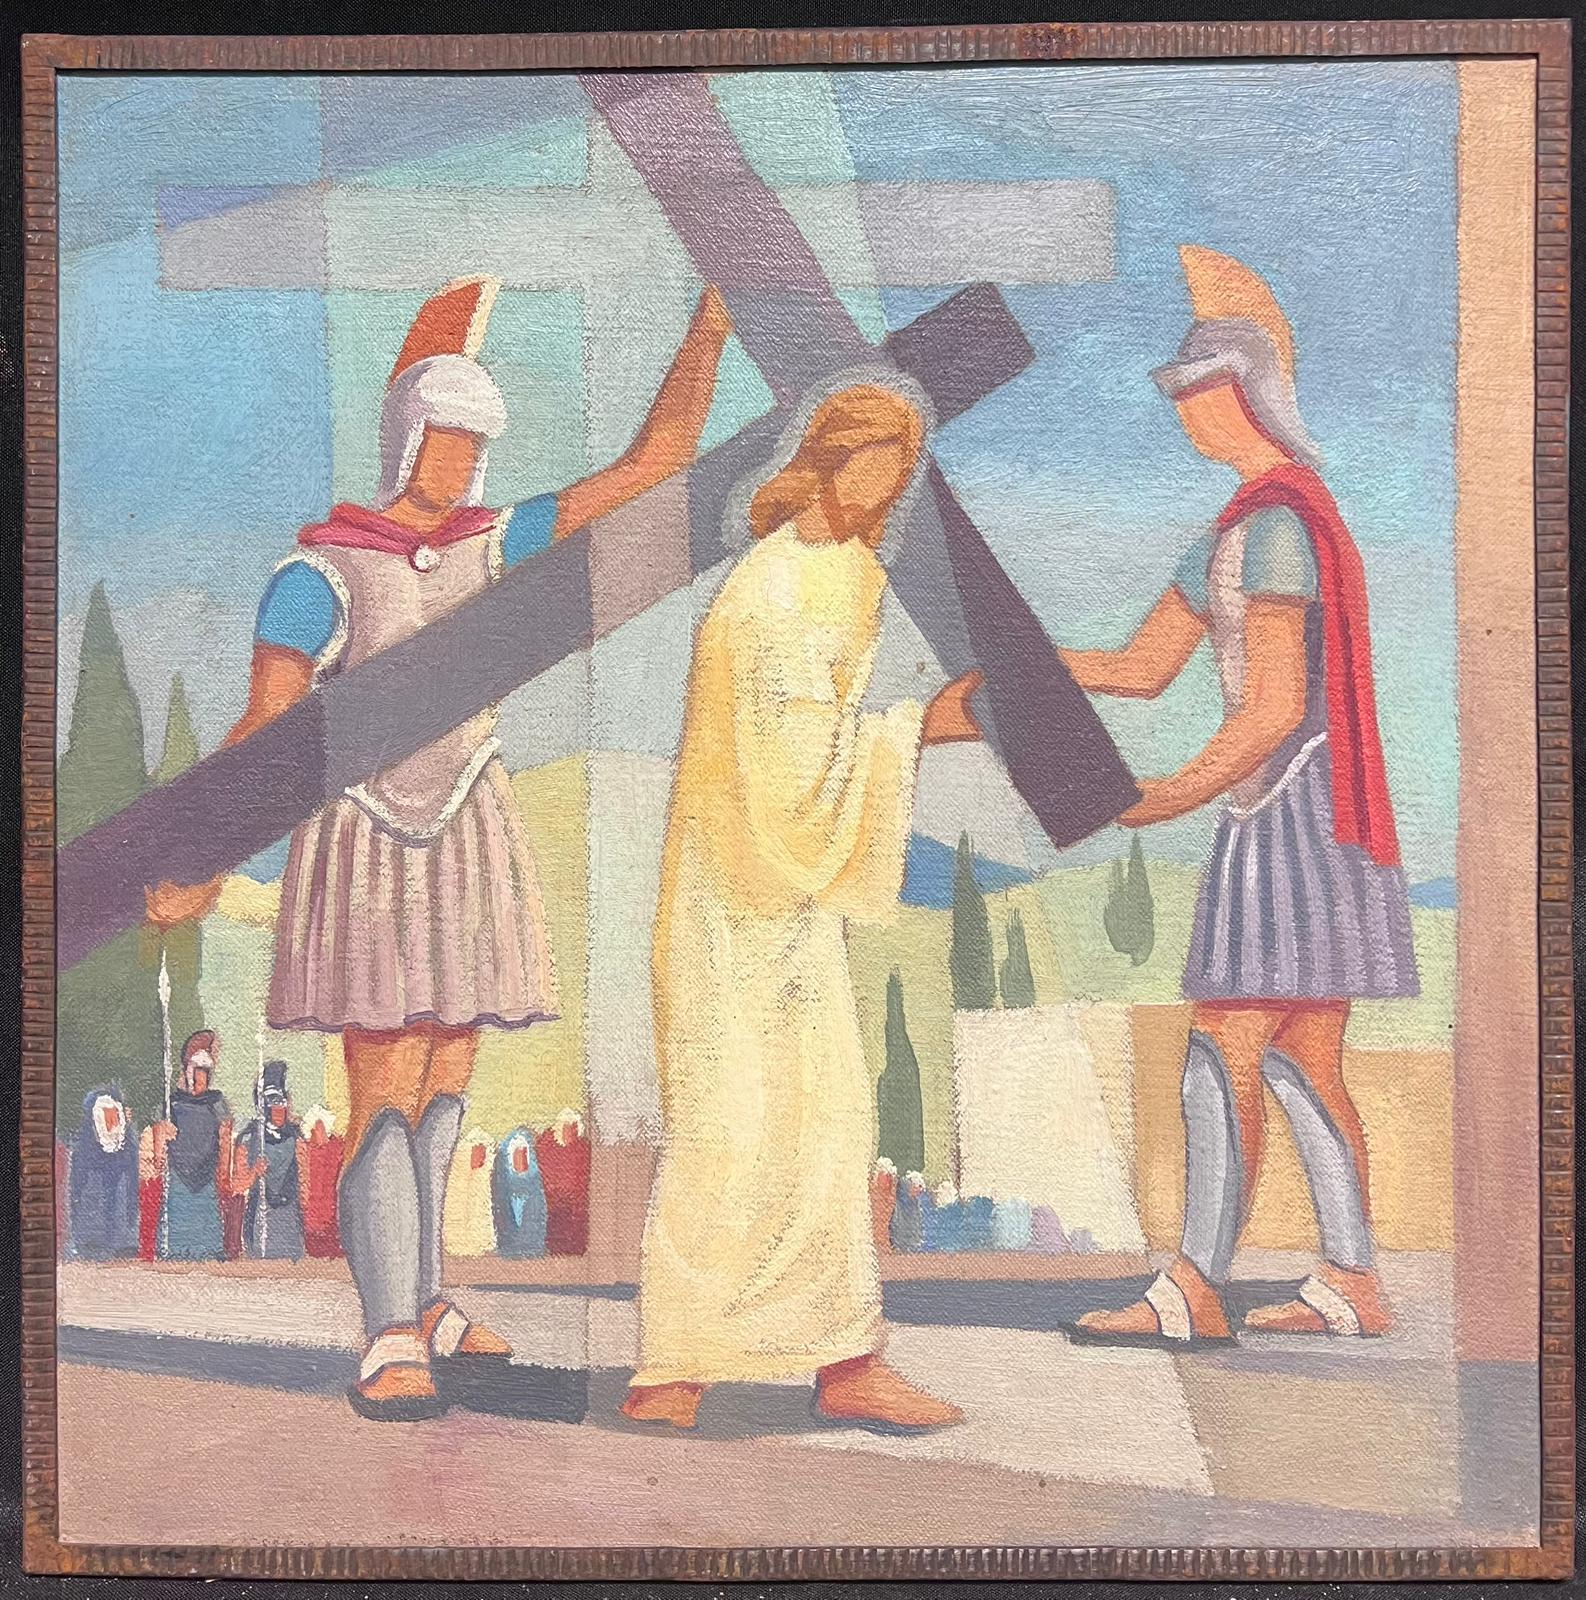 One of the Stations of the Cross
by Jean La Forgue (French 1901-1975)  *see notes below
oil painting on canvas, housed in original metal frame
overall dimensions: 17 x 17 inches
provenance: the artists estate, France
condition: very good and sound